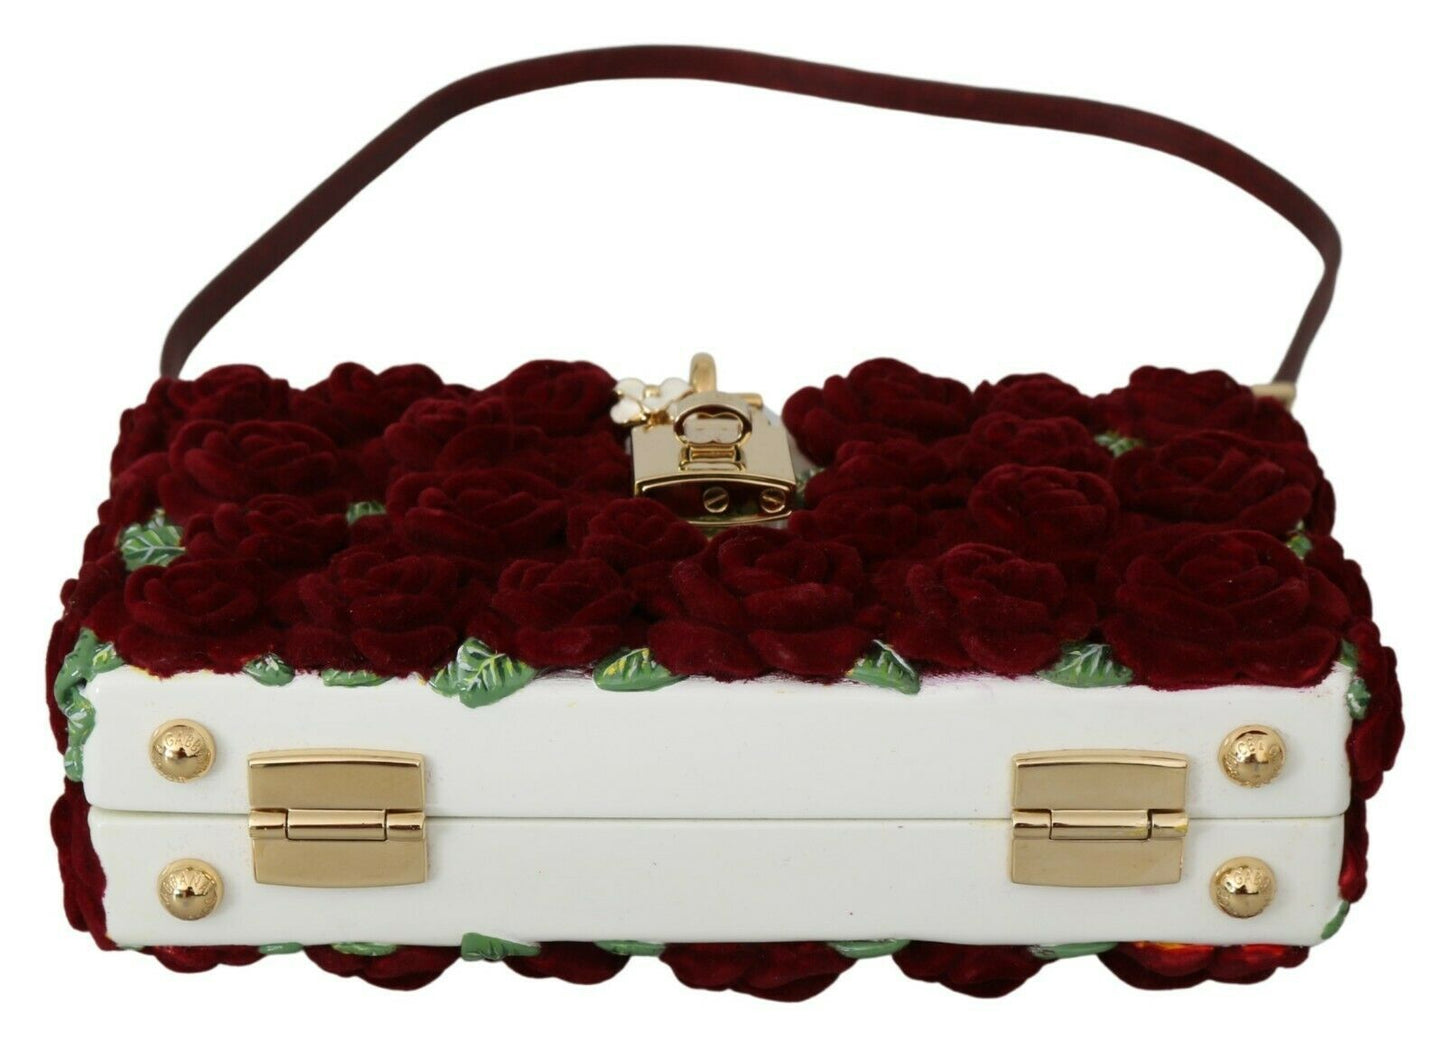 Exquisite Multicolor Box Bag with Red Details